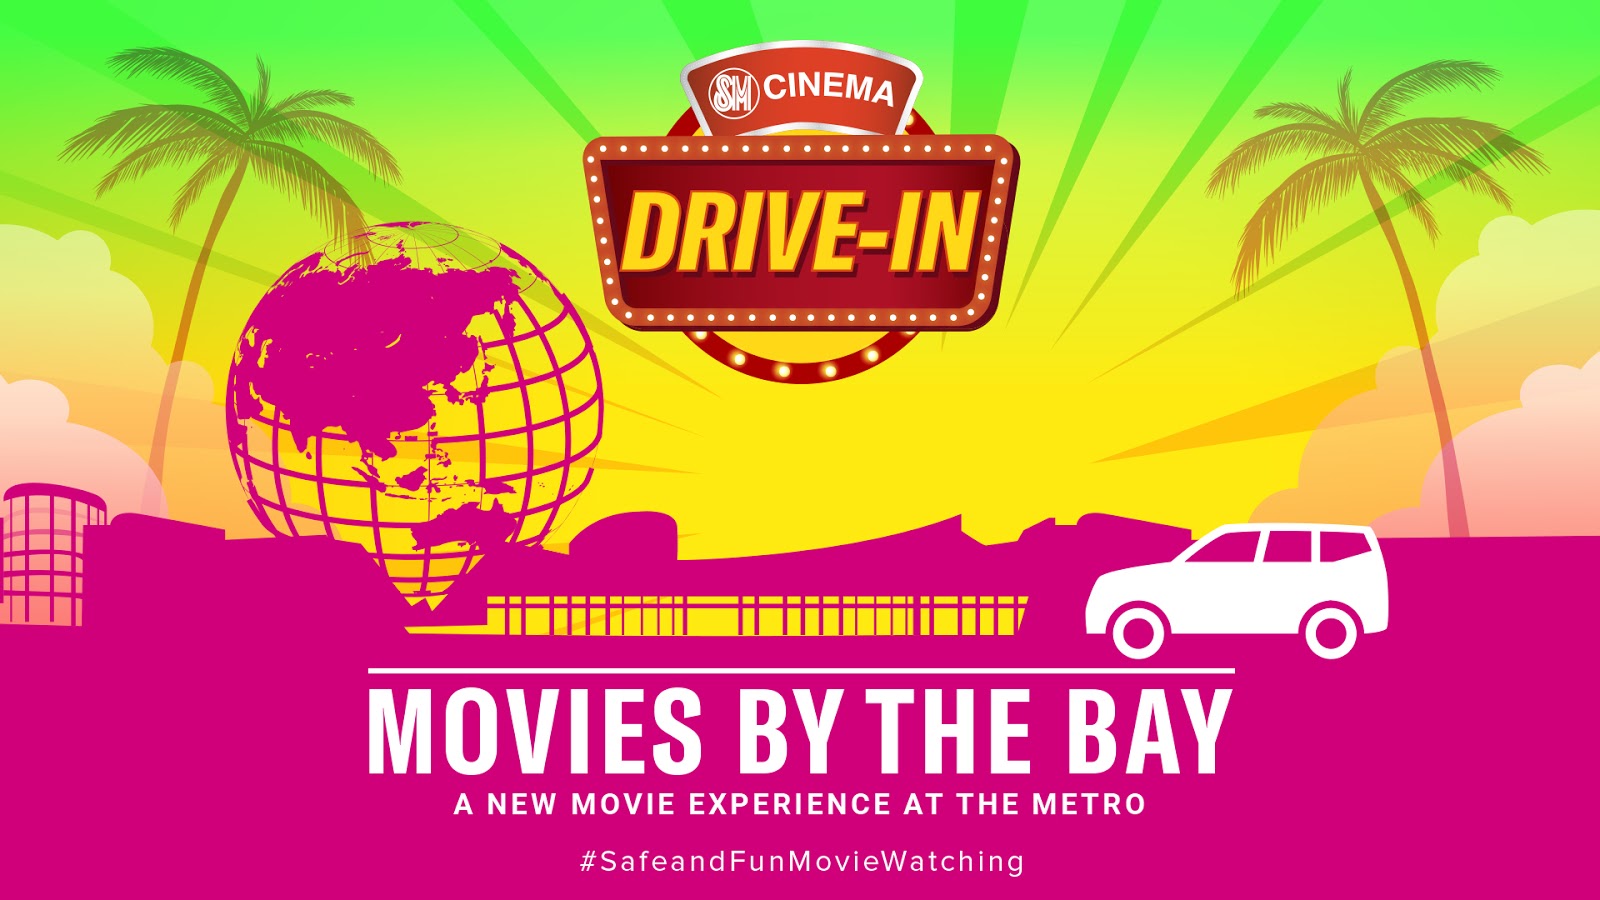 SM Cinema Drive-in Finally Arrives in Metro Manila Located at SM Mall of Asia Concert Grounds Starting September 9, 2020. 